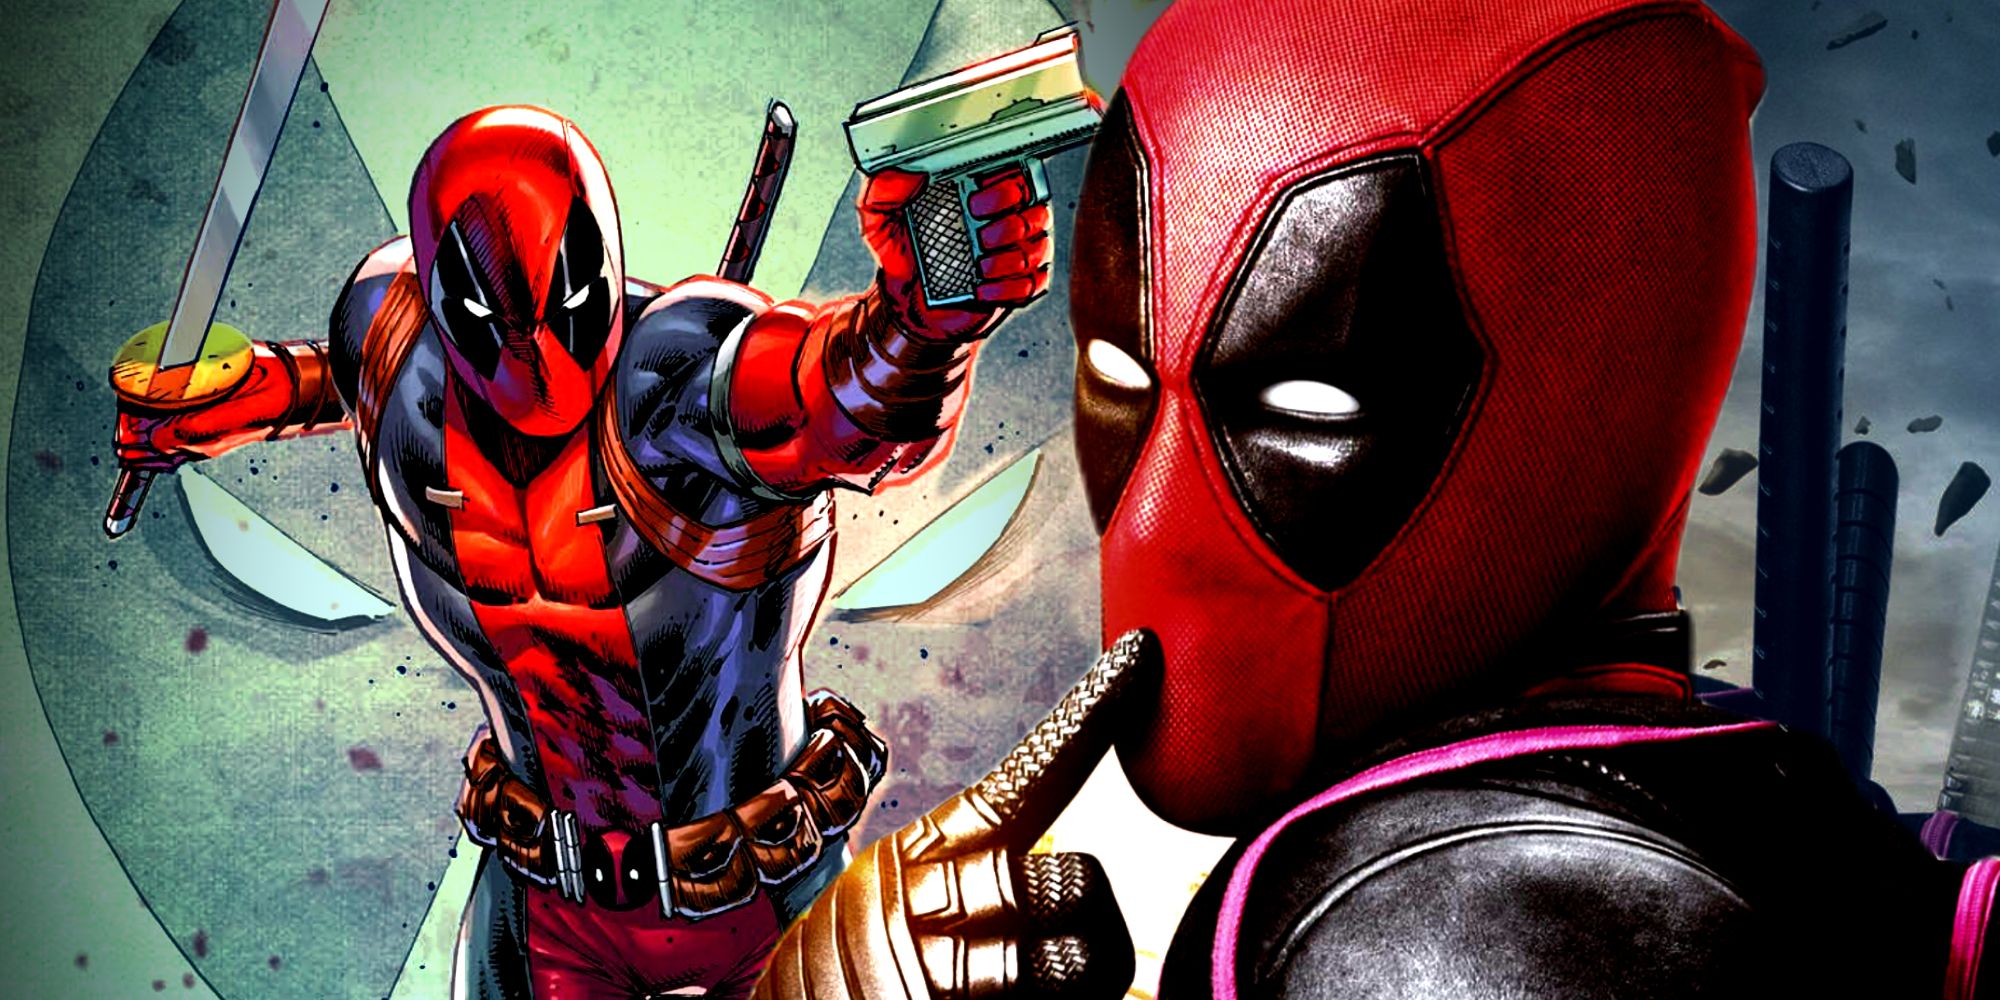 Deadpool Poses in Deadpool 2 Poster with Wade Wilson Wielding Guns and a Sword in the Background